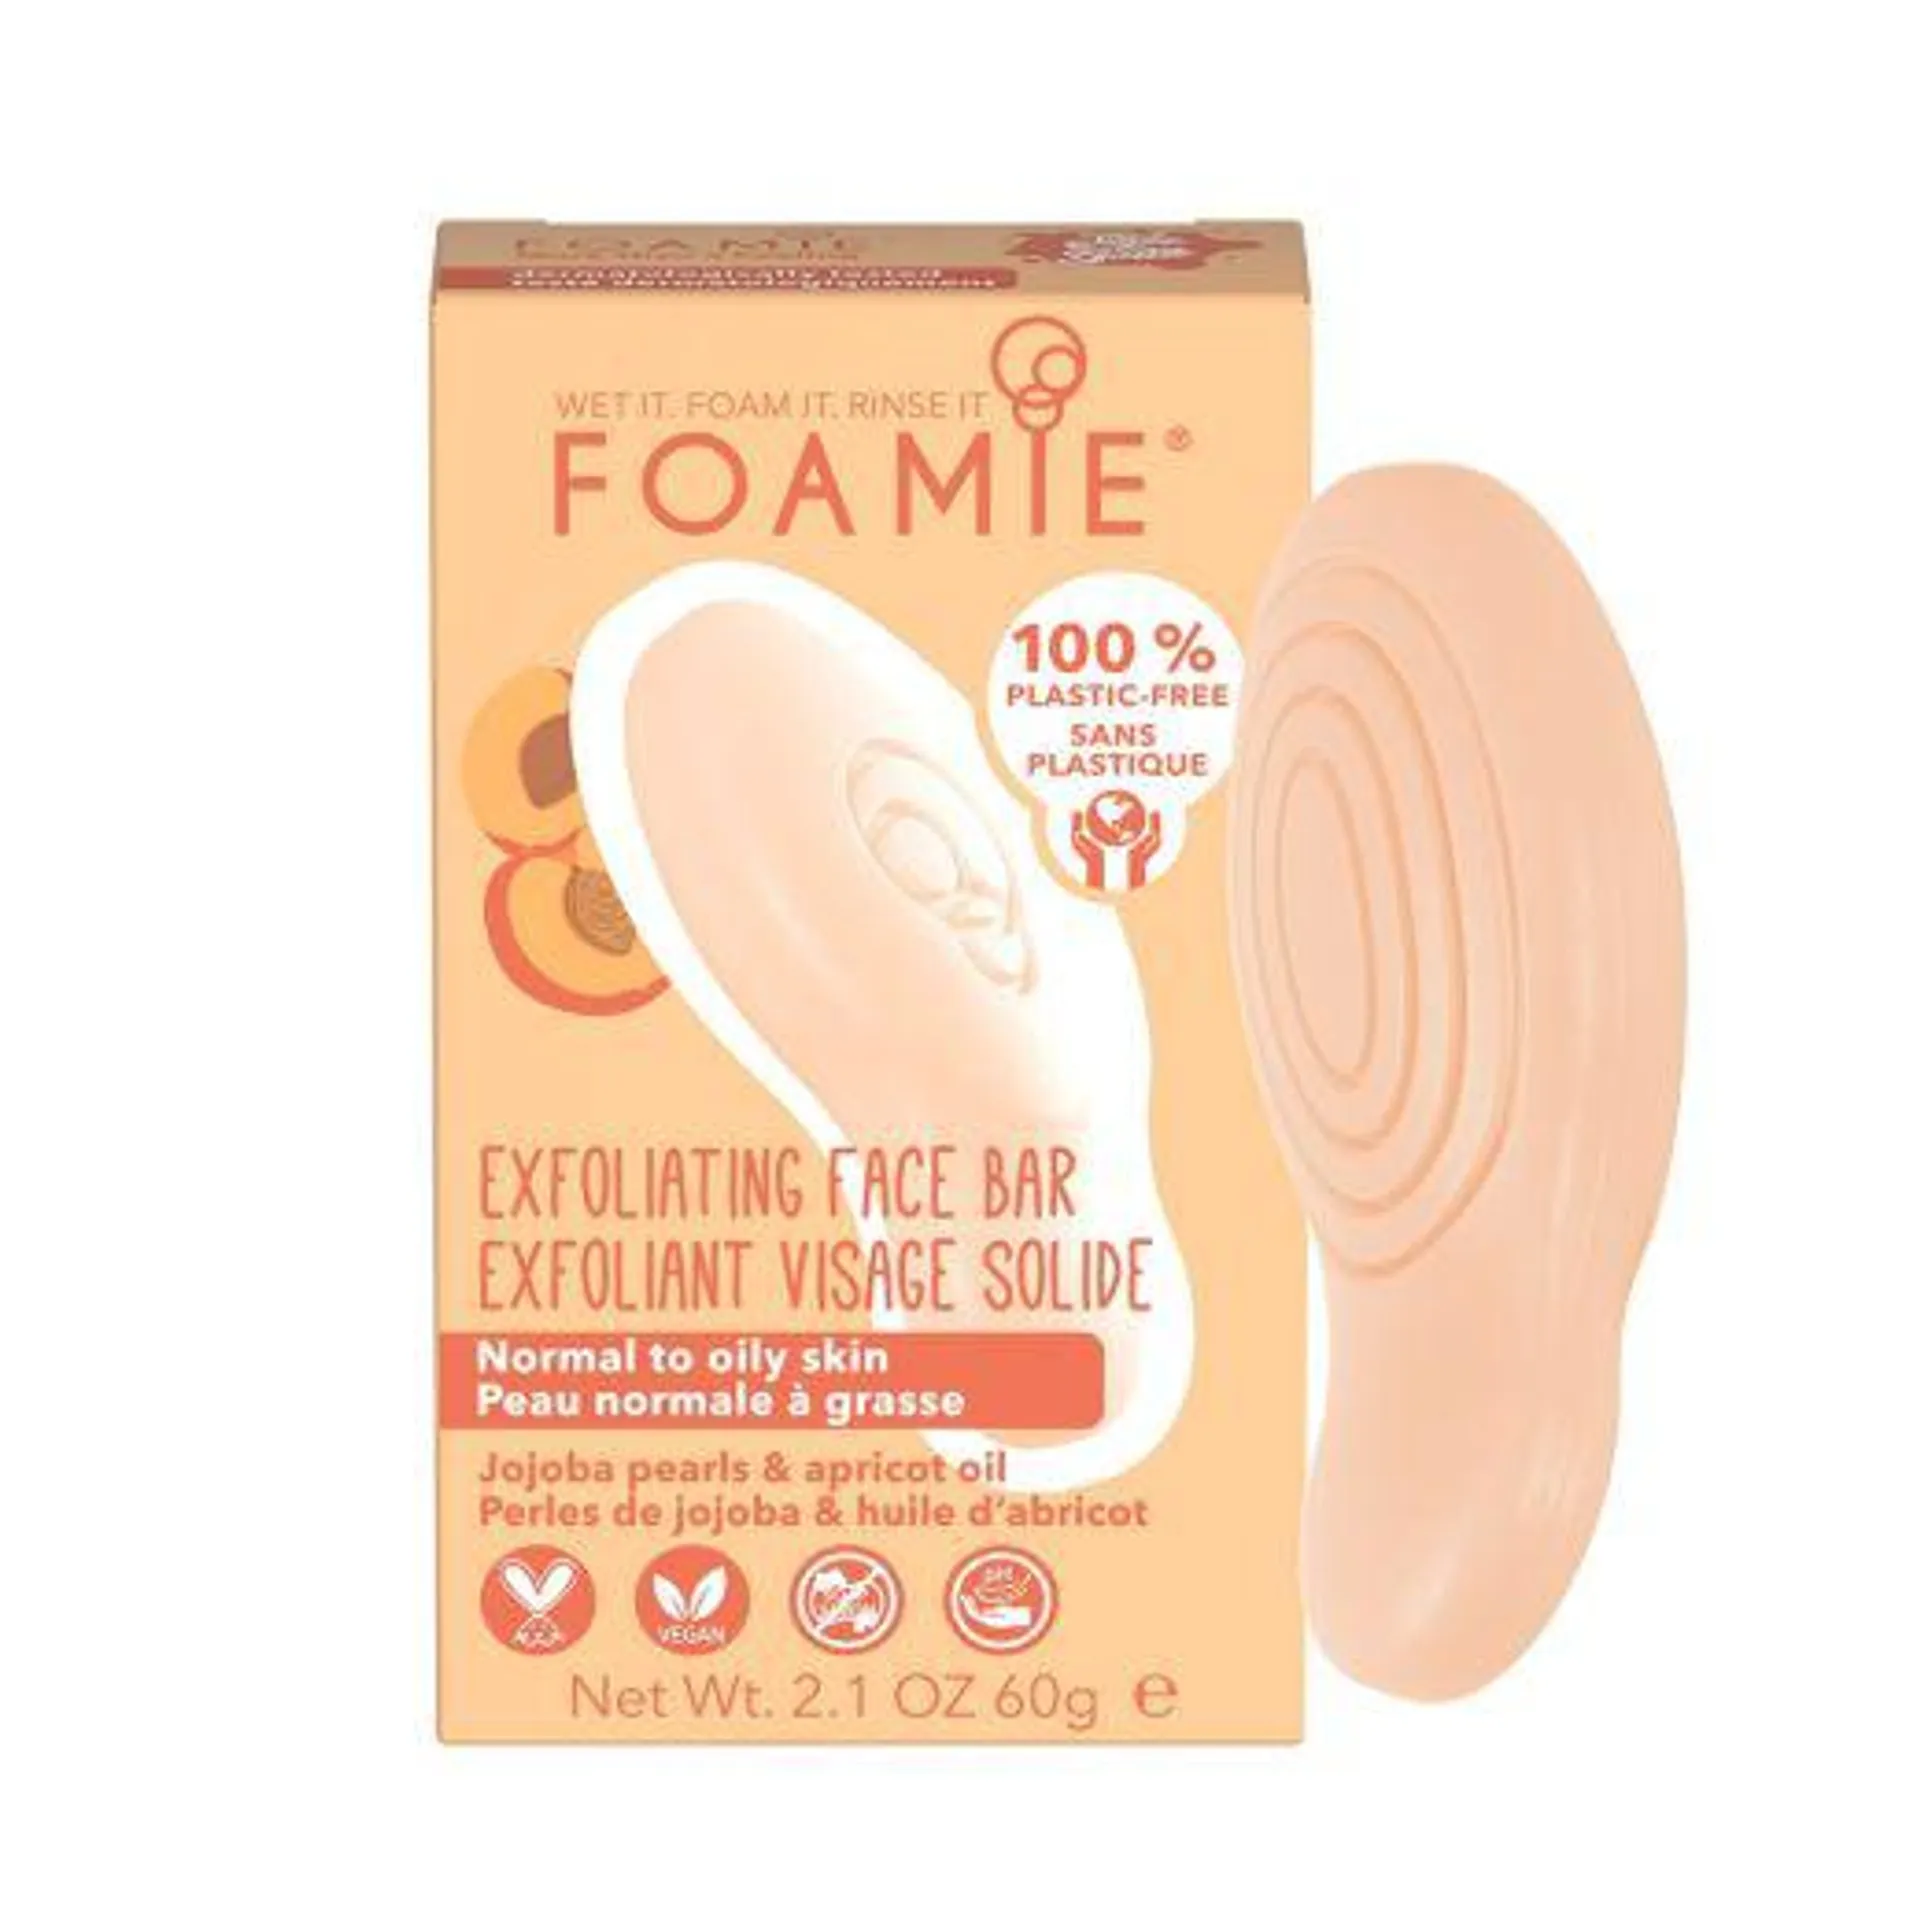 FOAMIE Face Bar - Exfoliating for Normal to Oily skin